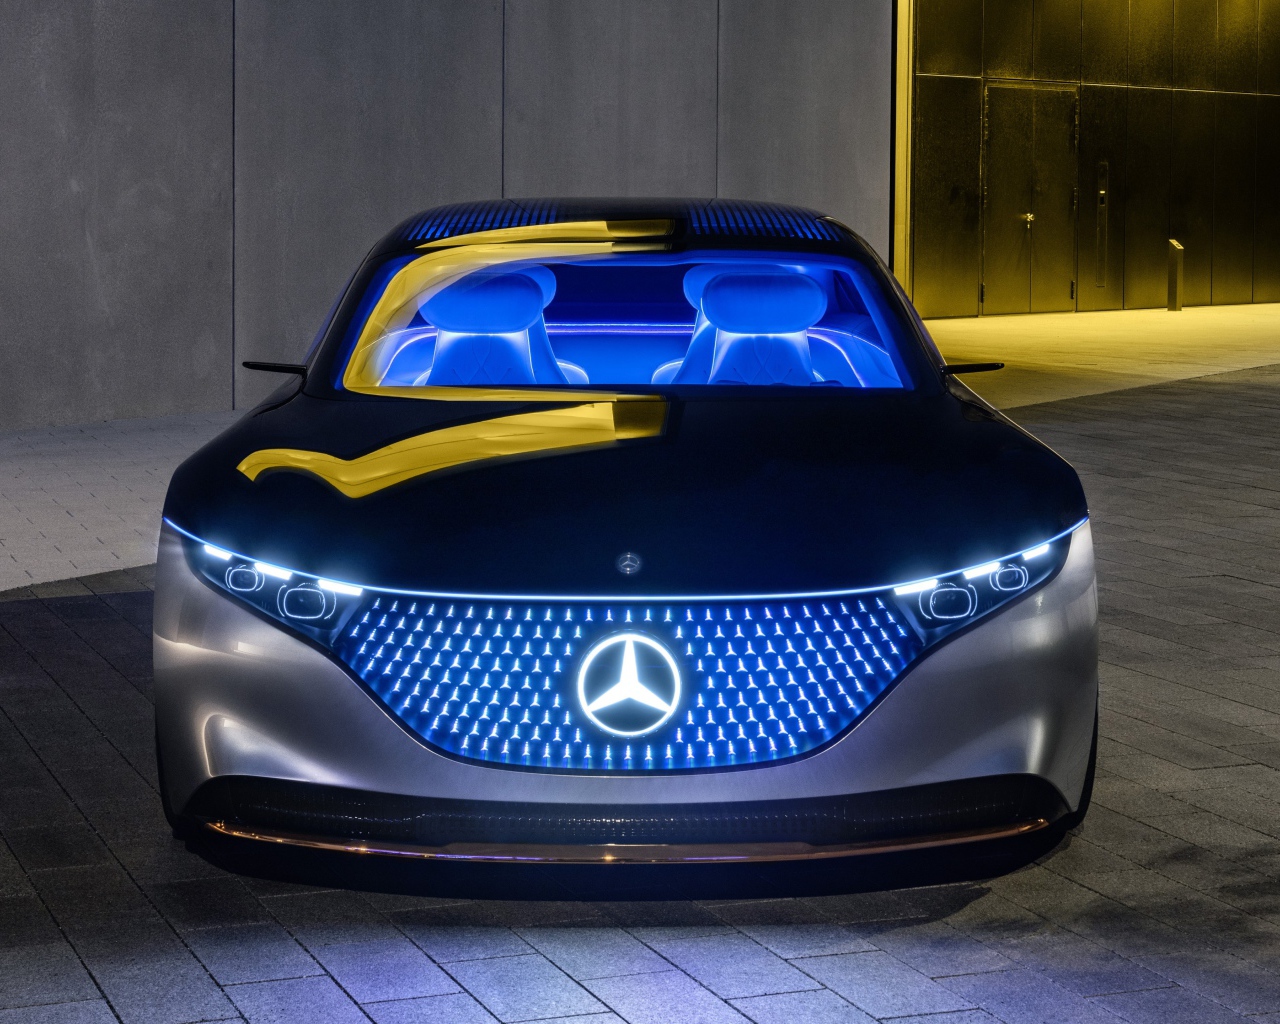 2019 Mercedes-Benz Vision EQS with neon lights